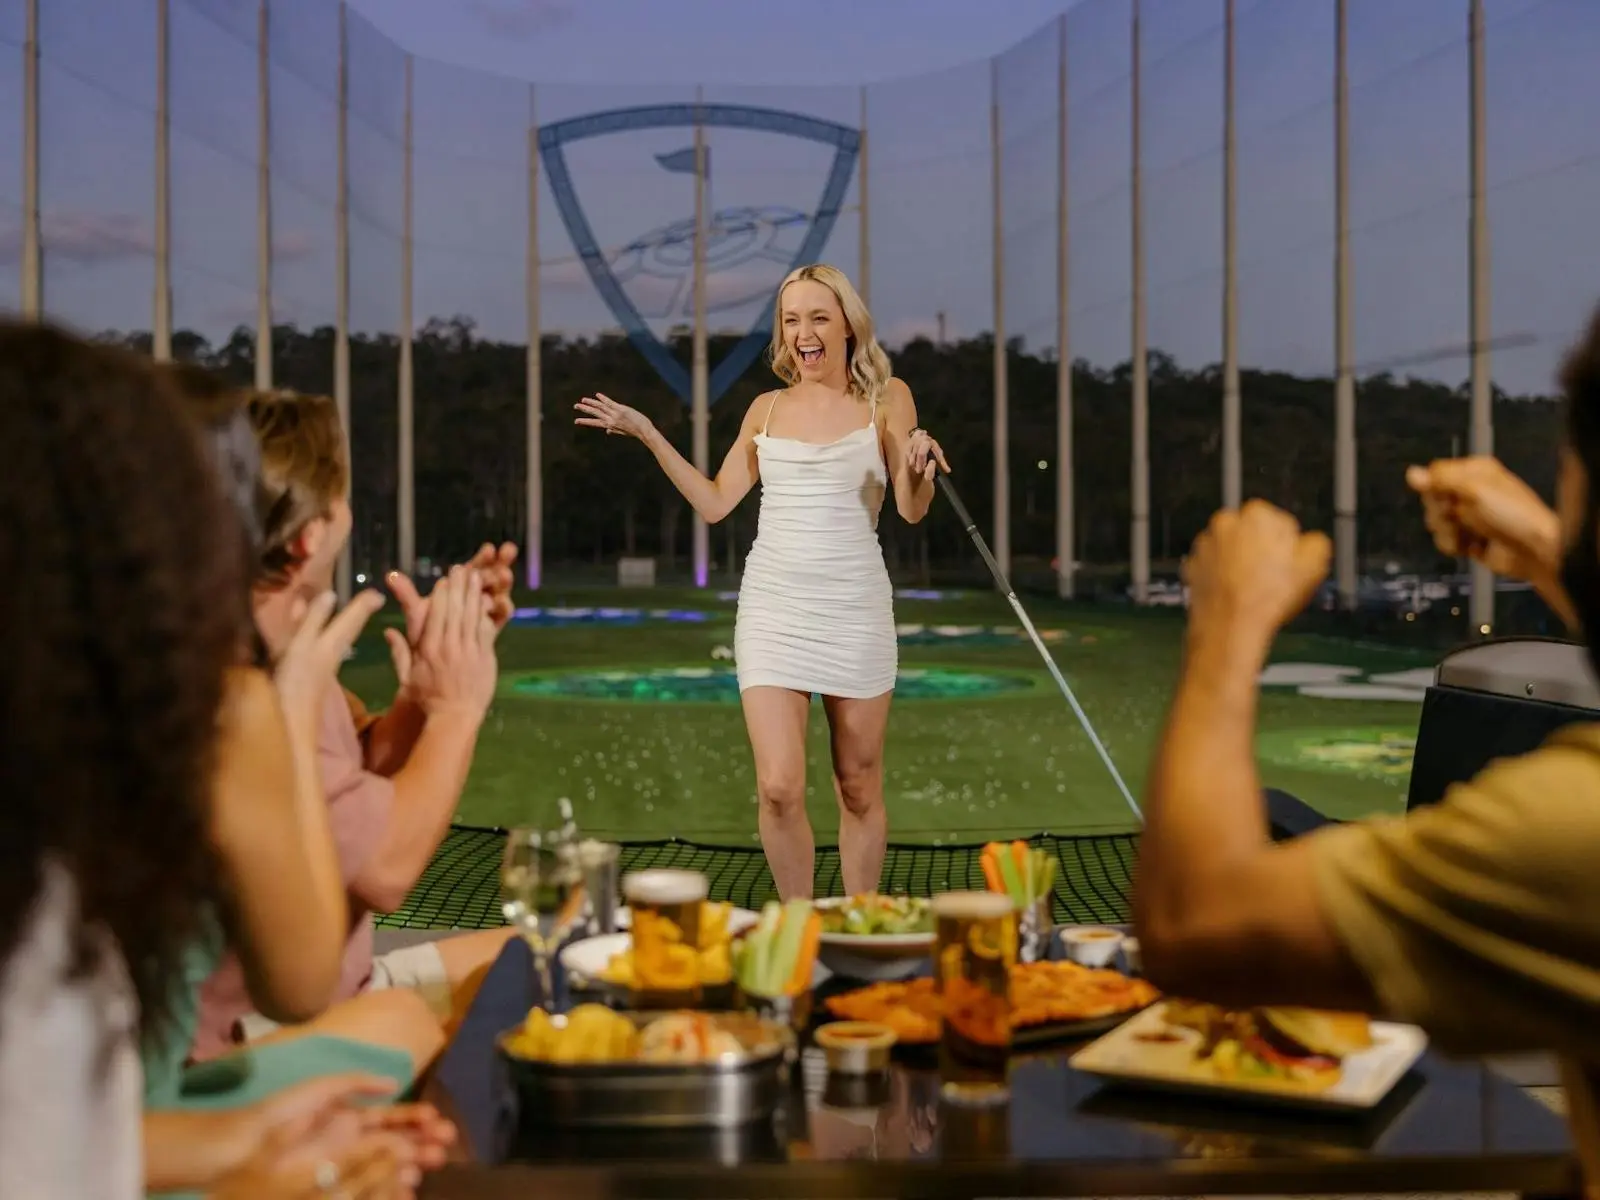 Experience Topgolf from $50 per hour for 6 people!